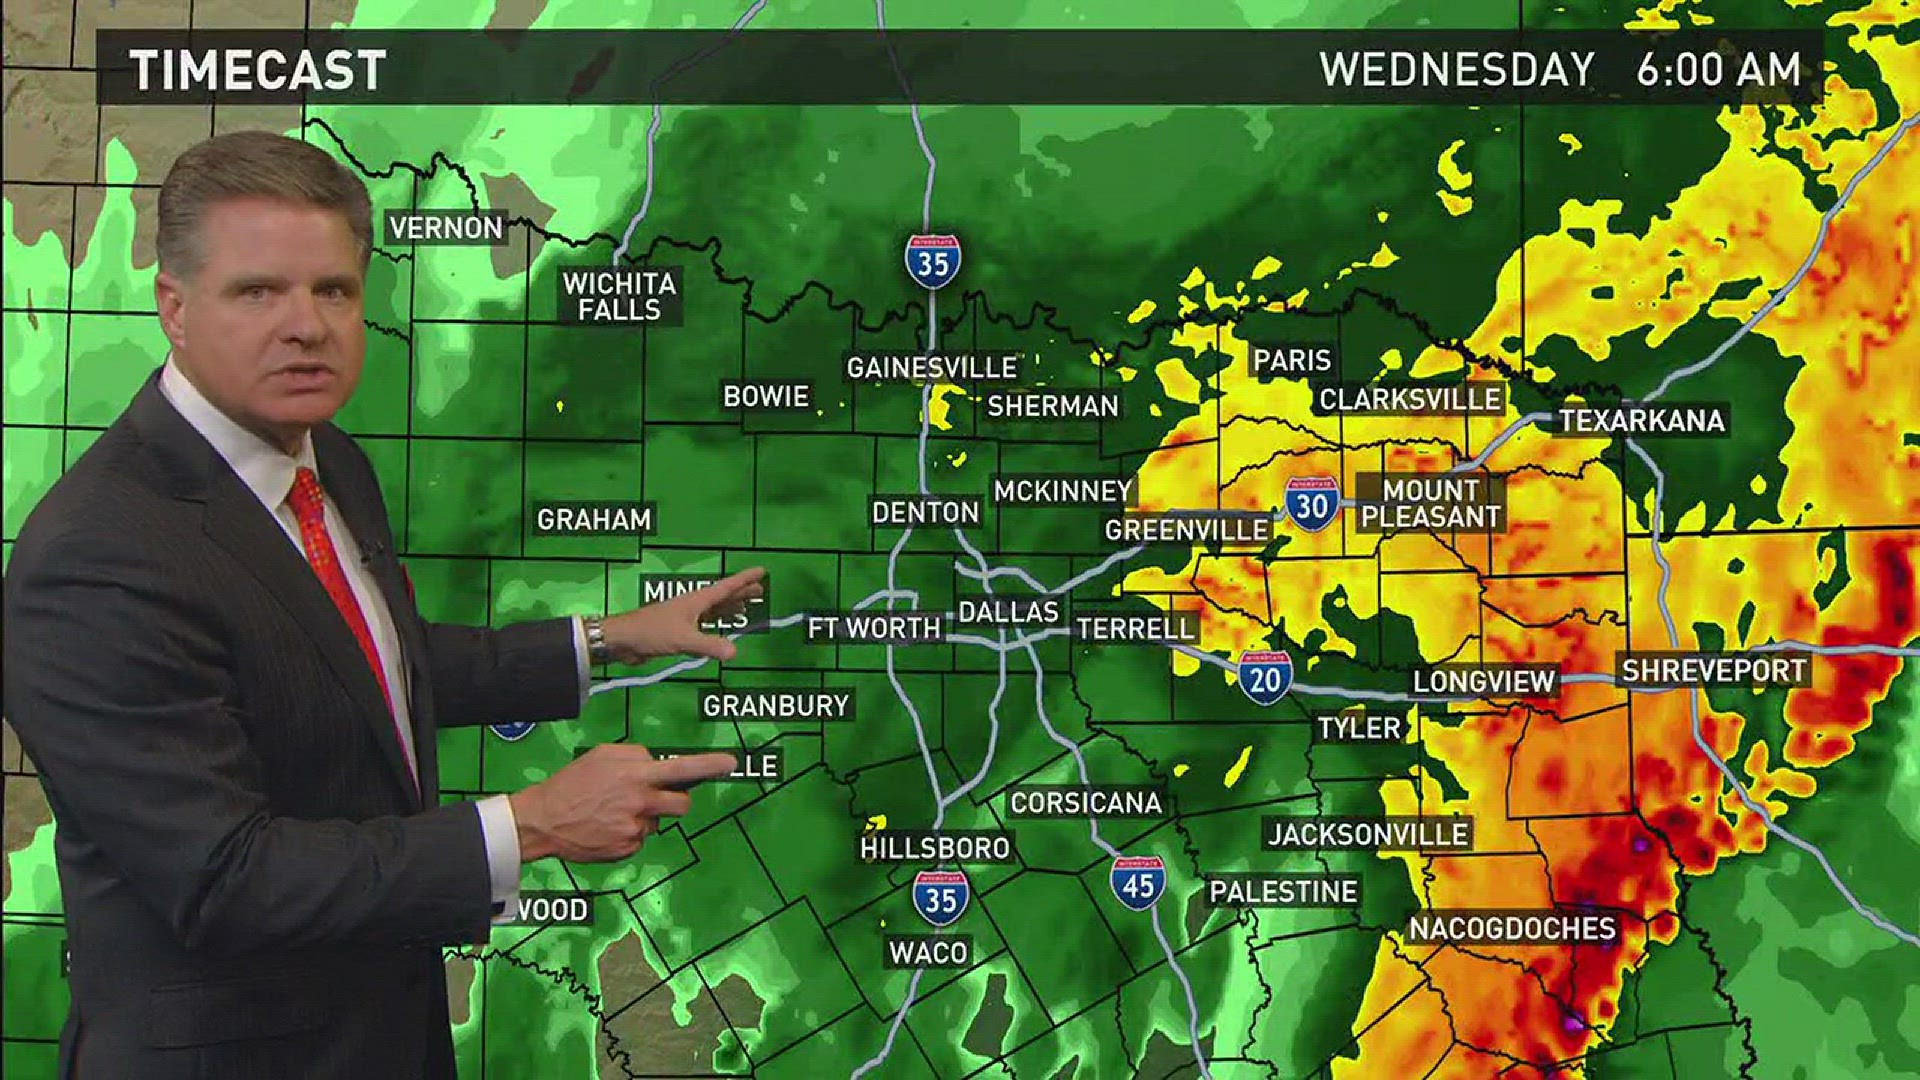 Chief meteorologist Pete Delkus forecasts the next two days of a wet week in North Texas.